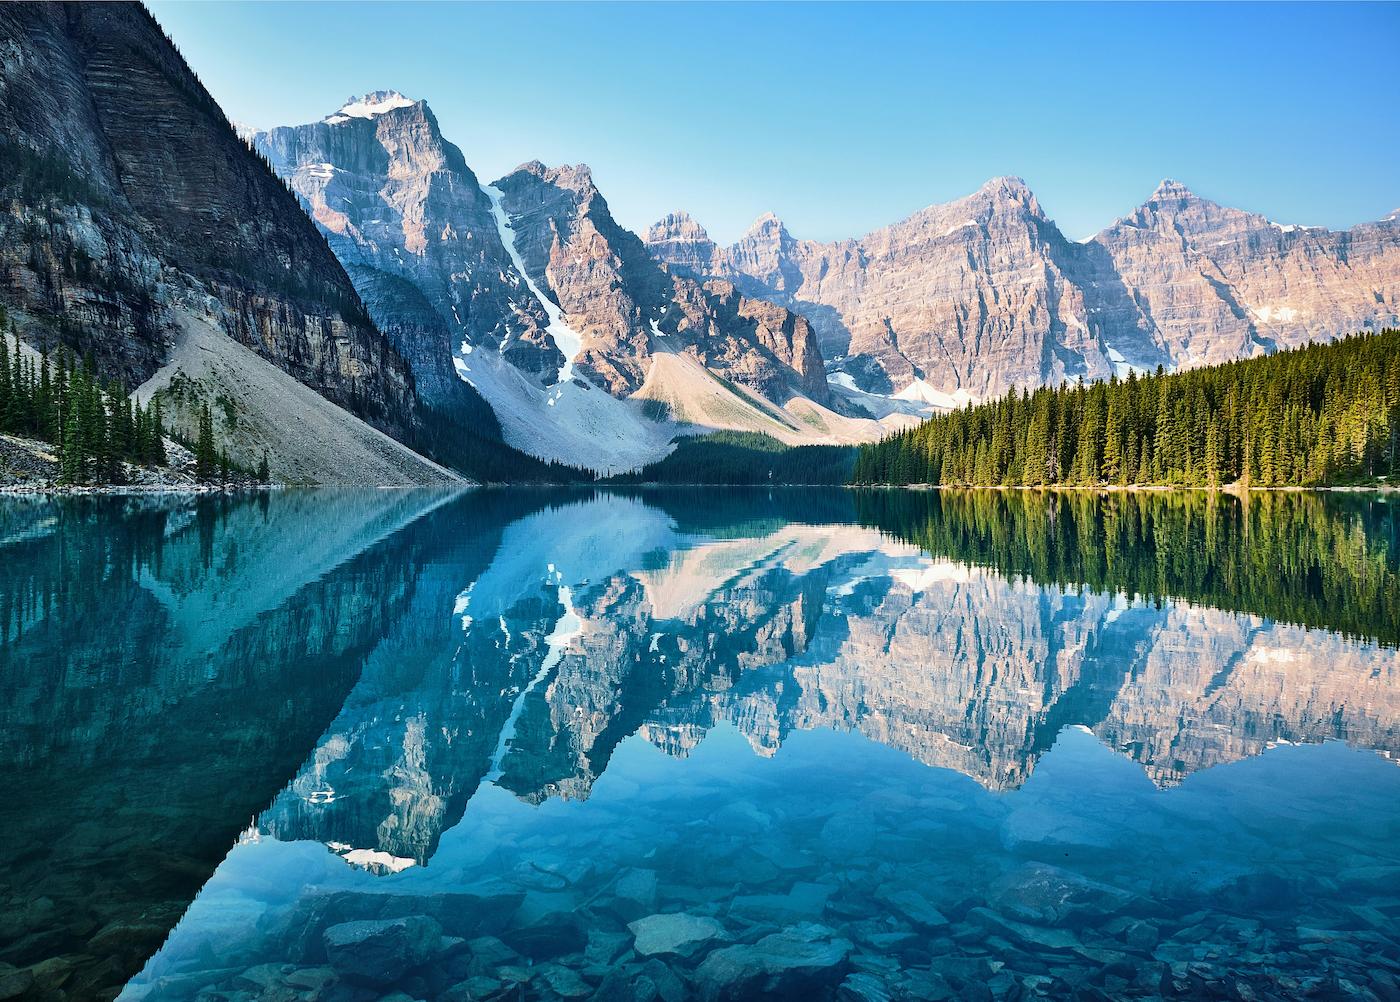 A picture of a lake with mountains in the background, in Canada.